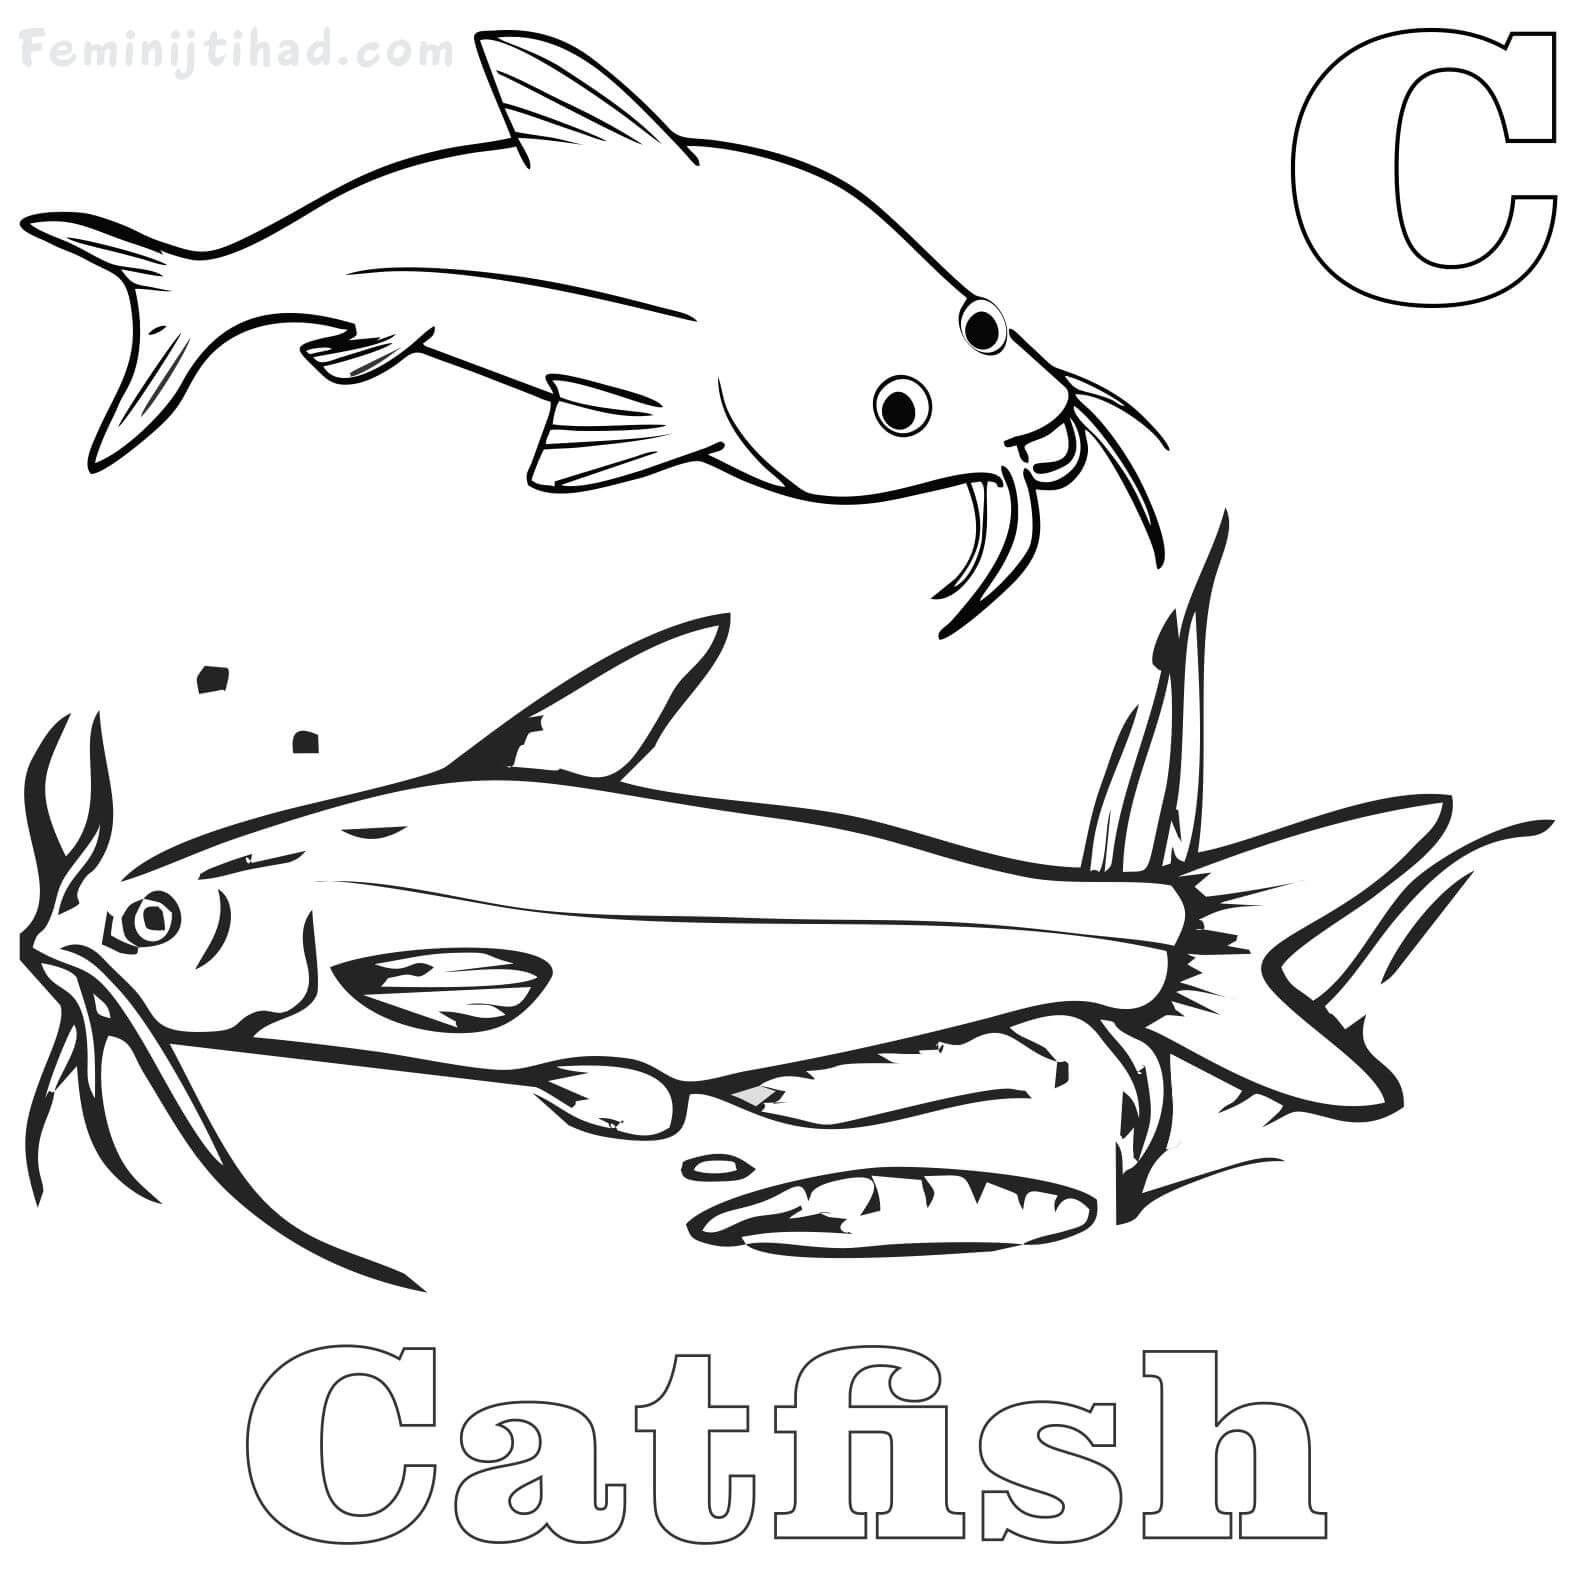 coloring page of a catfish